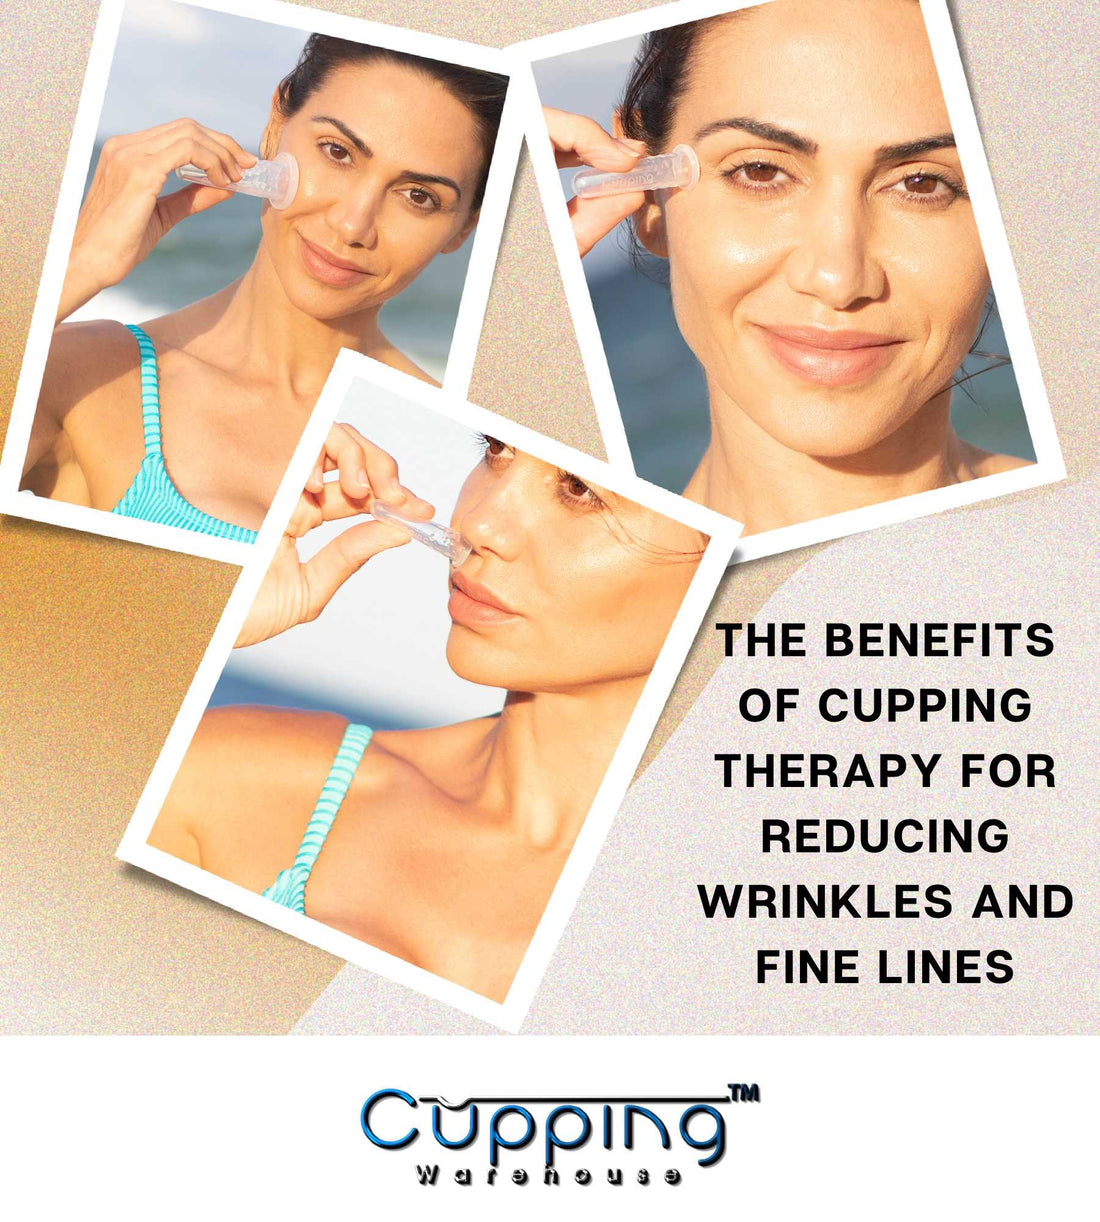 Cupping Therapy: A Natural Solution for Wrinkles